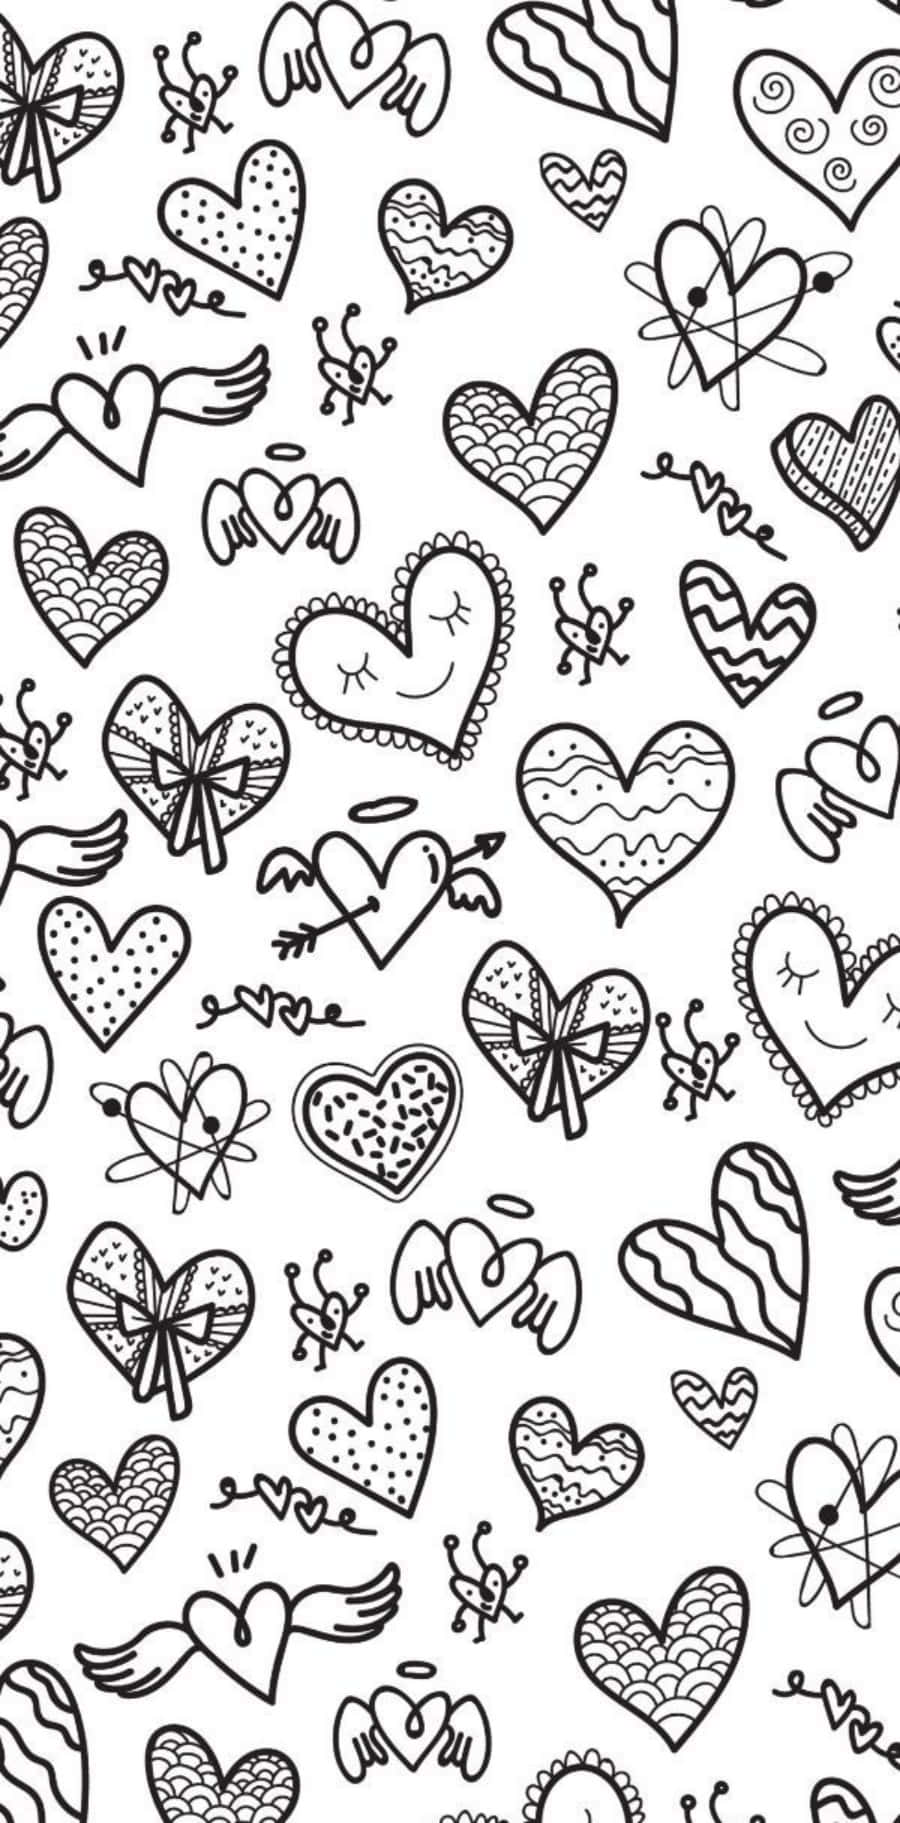 A Charming Heart Doodle Art on a Pinkish Background Wallpaper